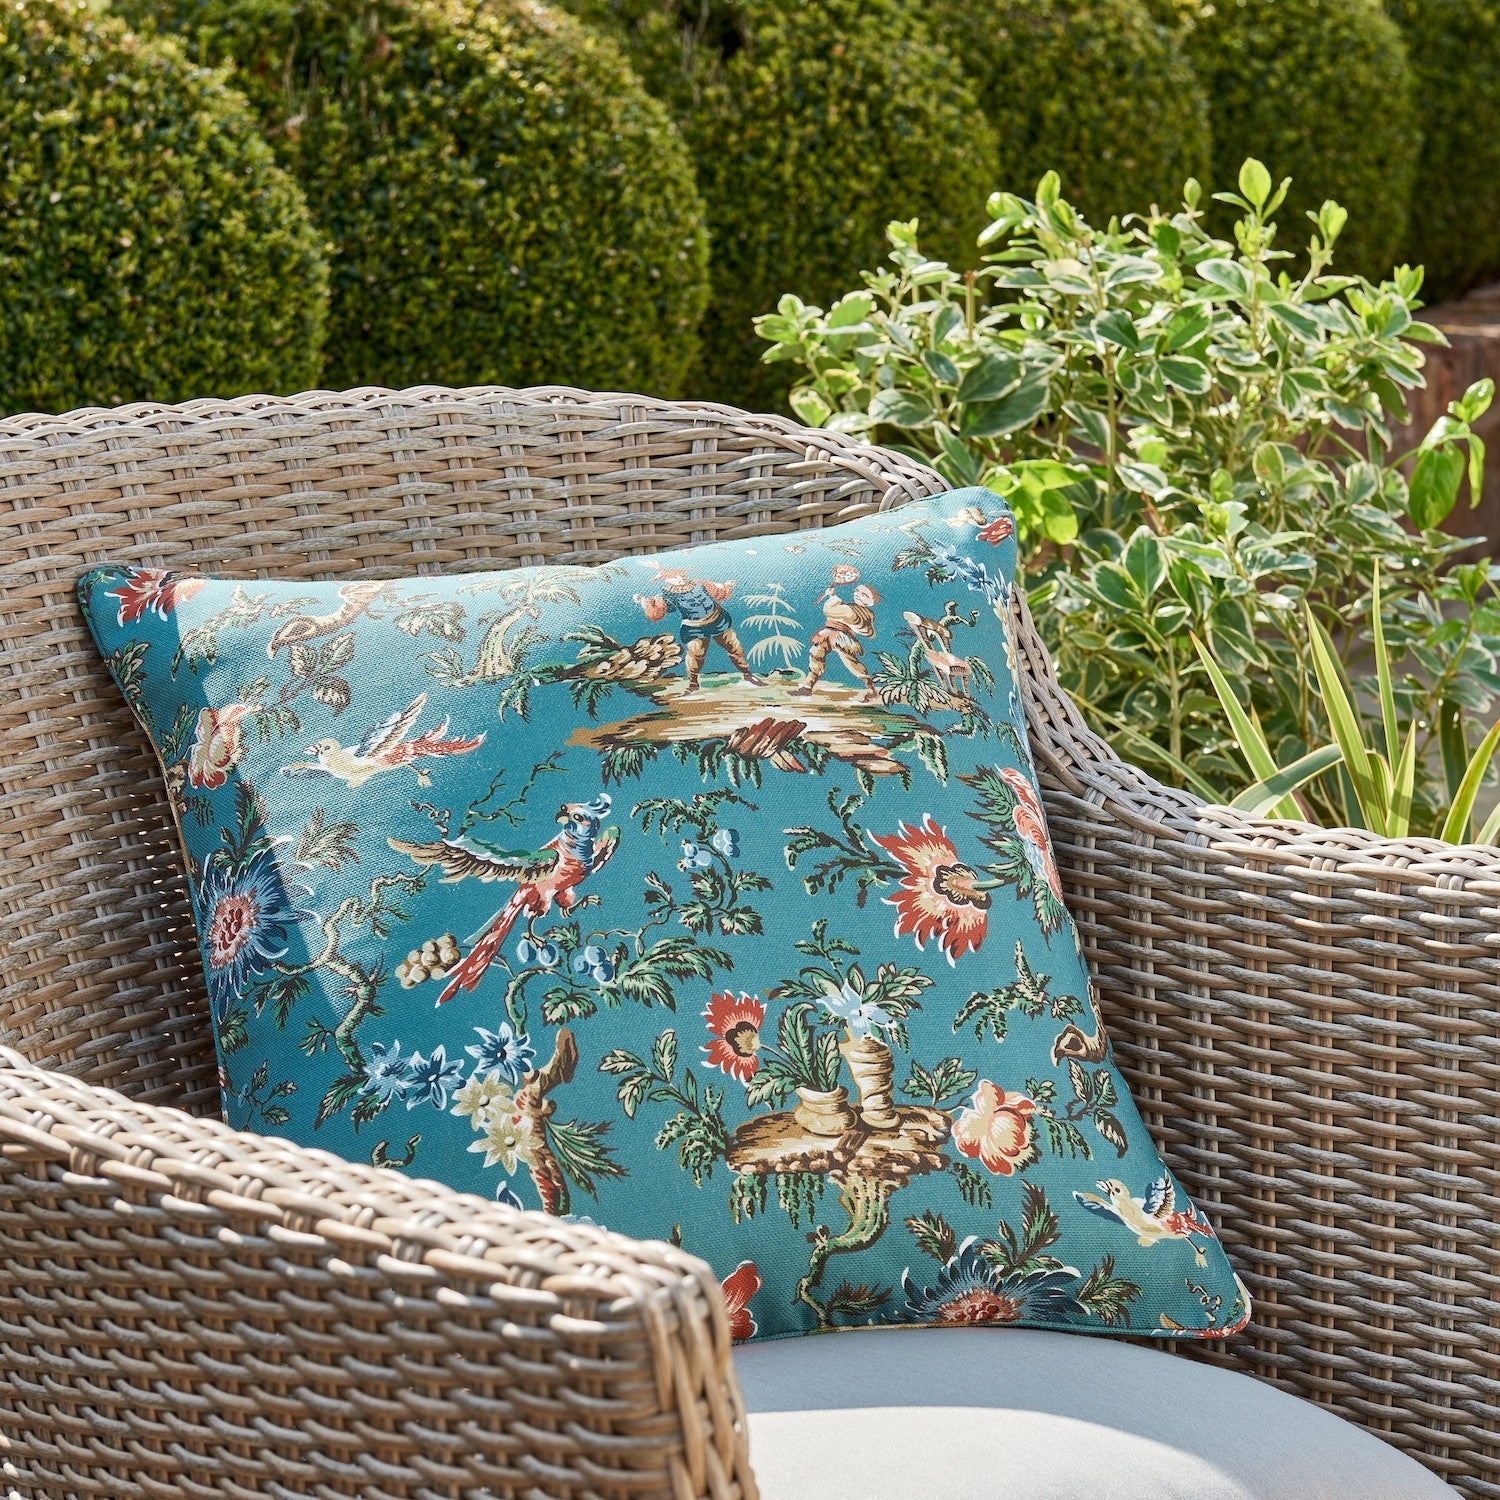 CHINESE GARDEN Teal Outdoor Cushion - Warner House